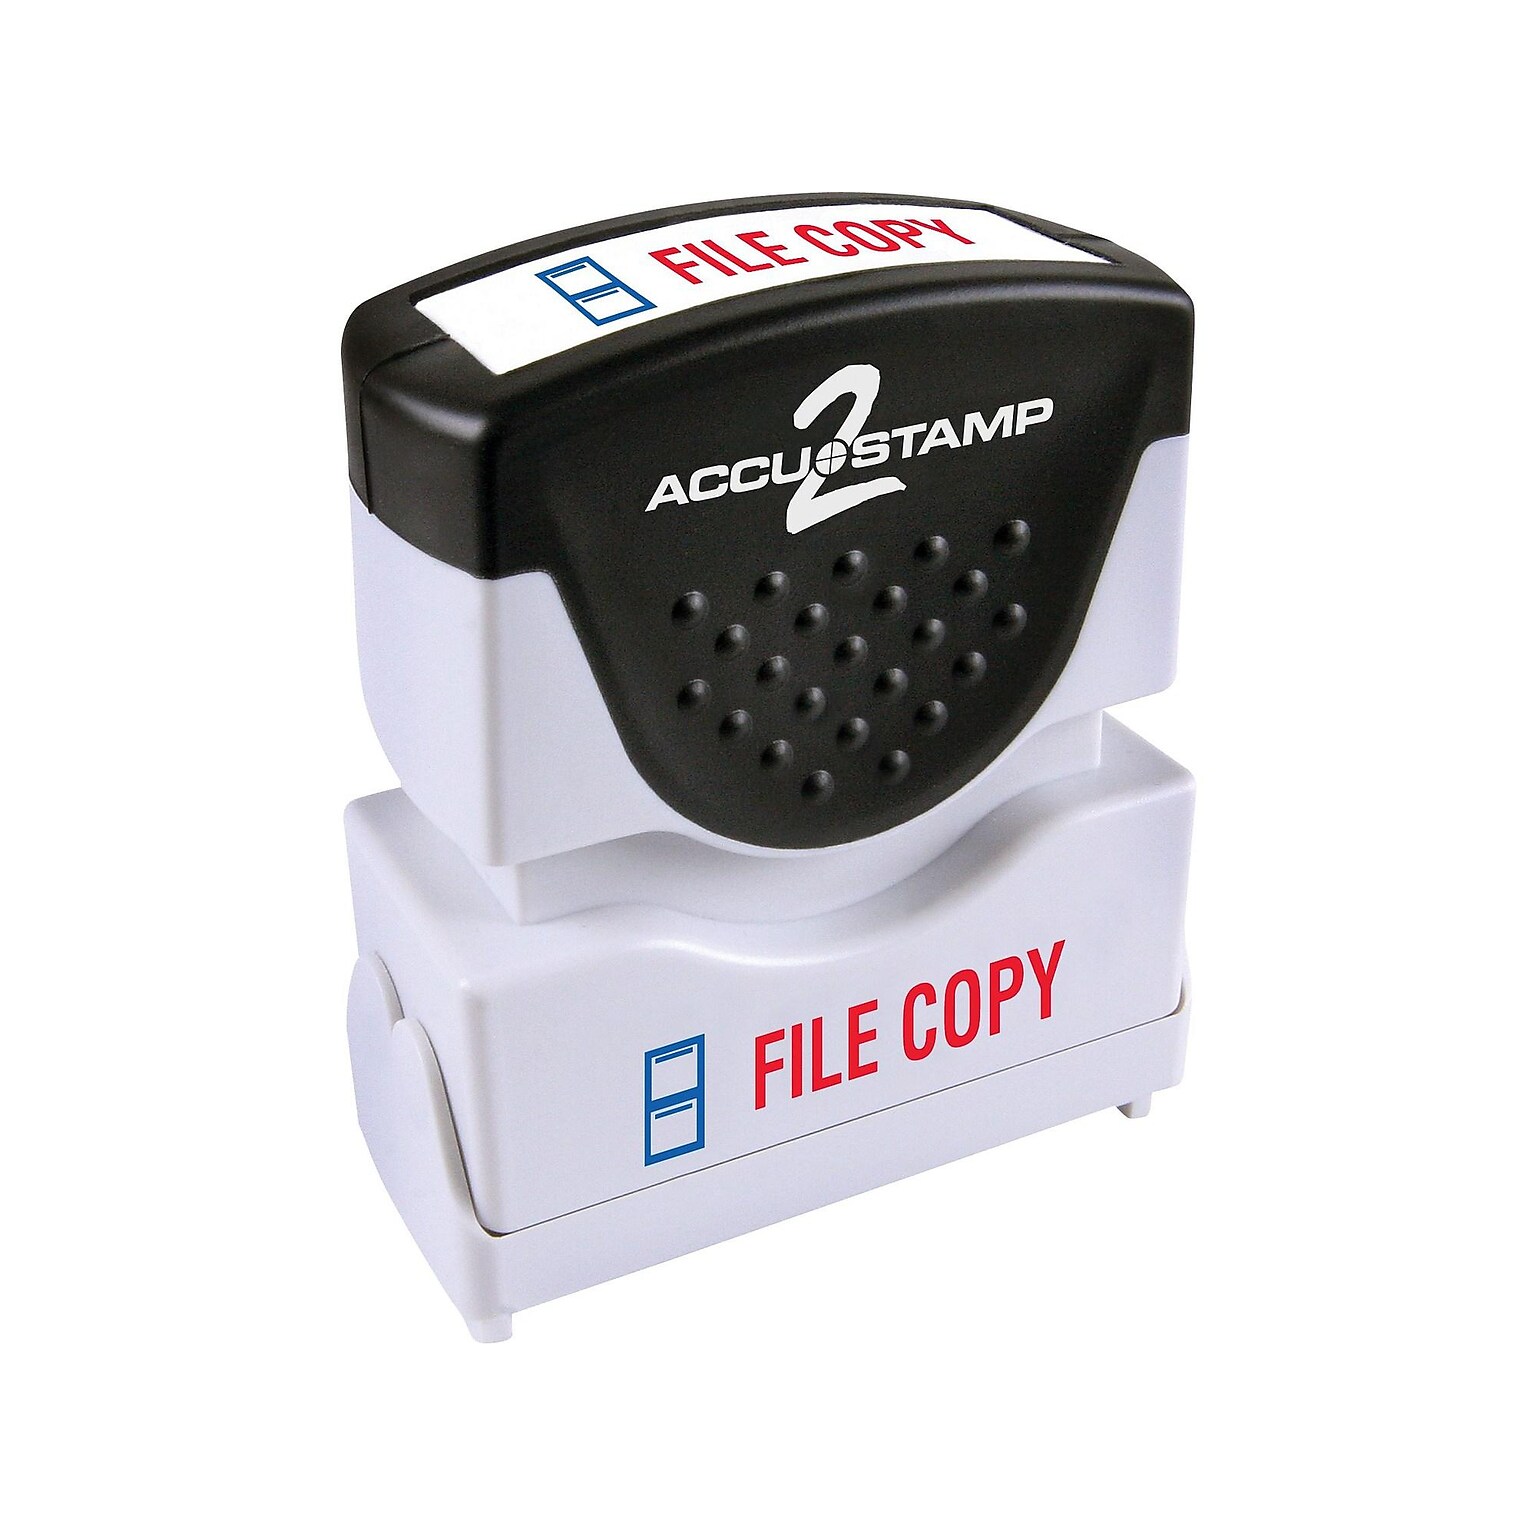 Accu-Stamp 2 Pre-Inked Stamp, FILE COPY, Blue and Red Inks (035524)